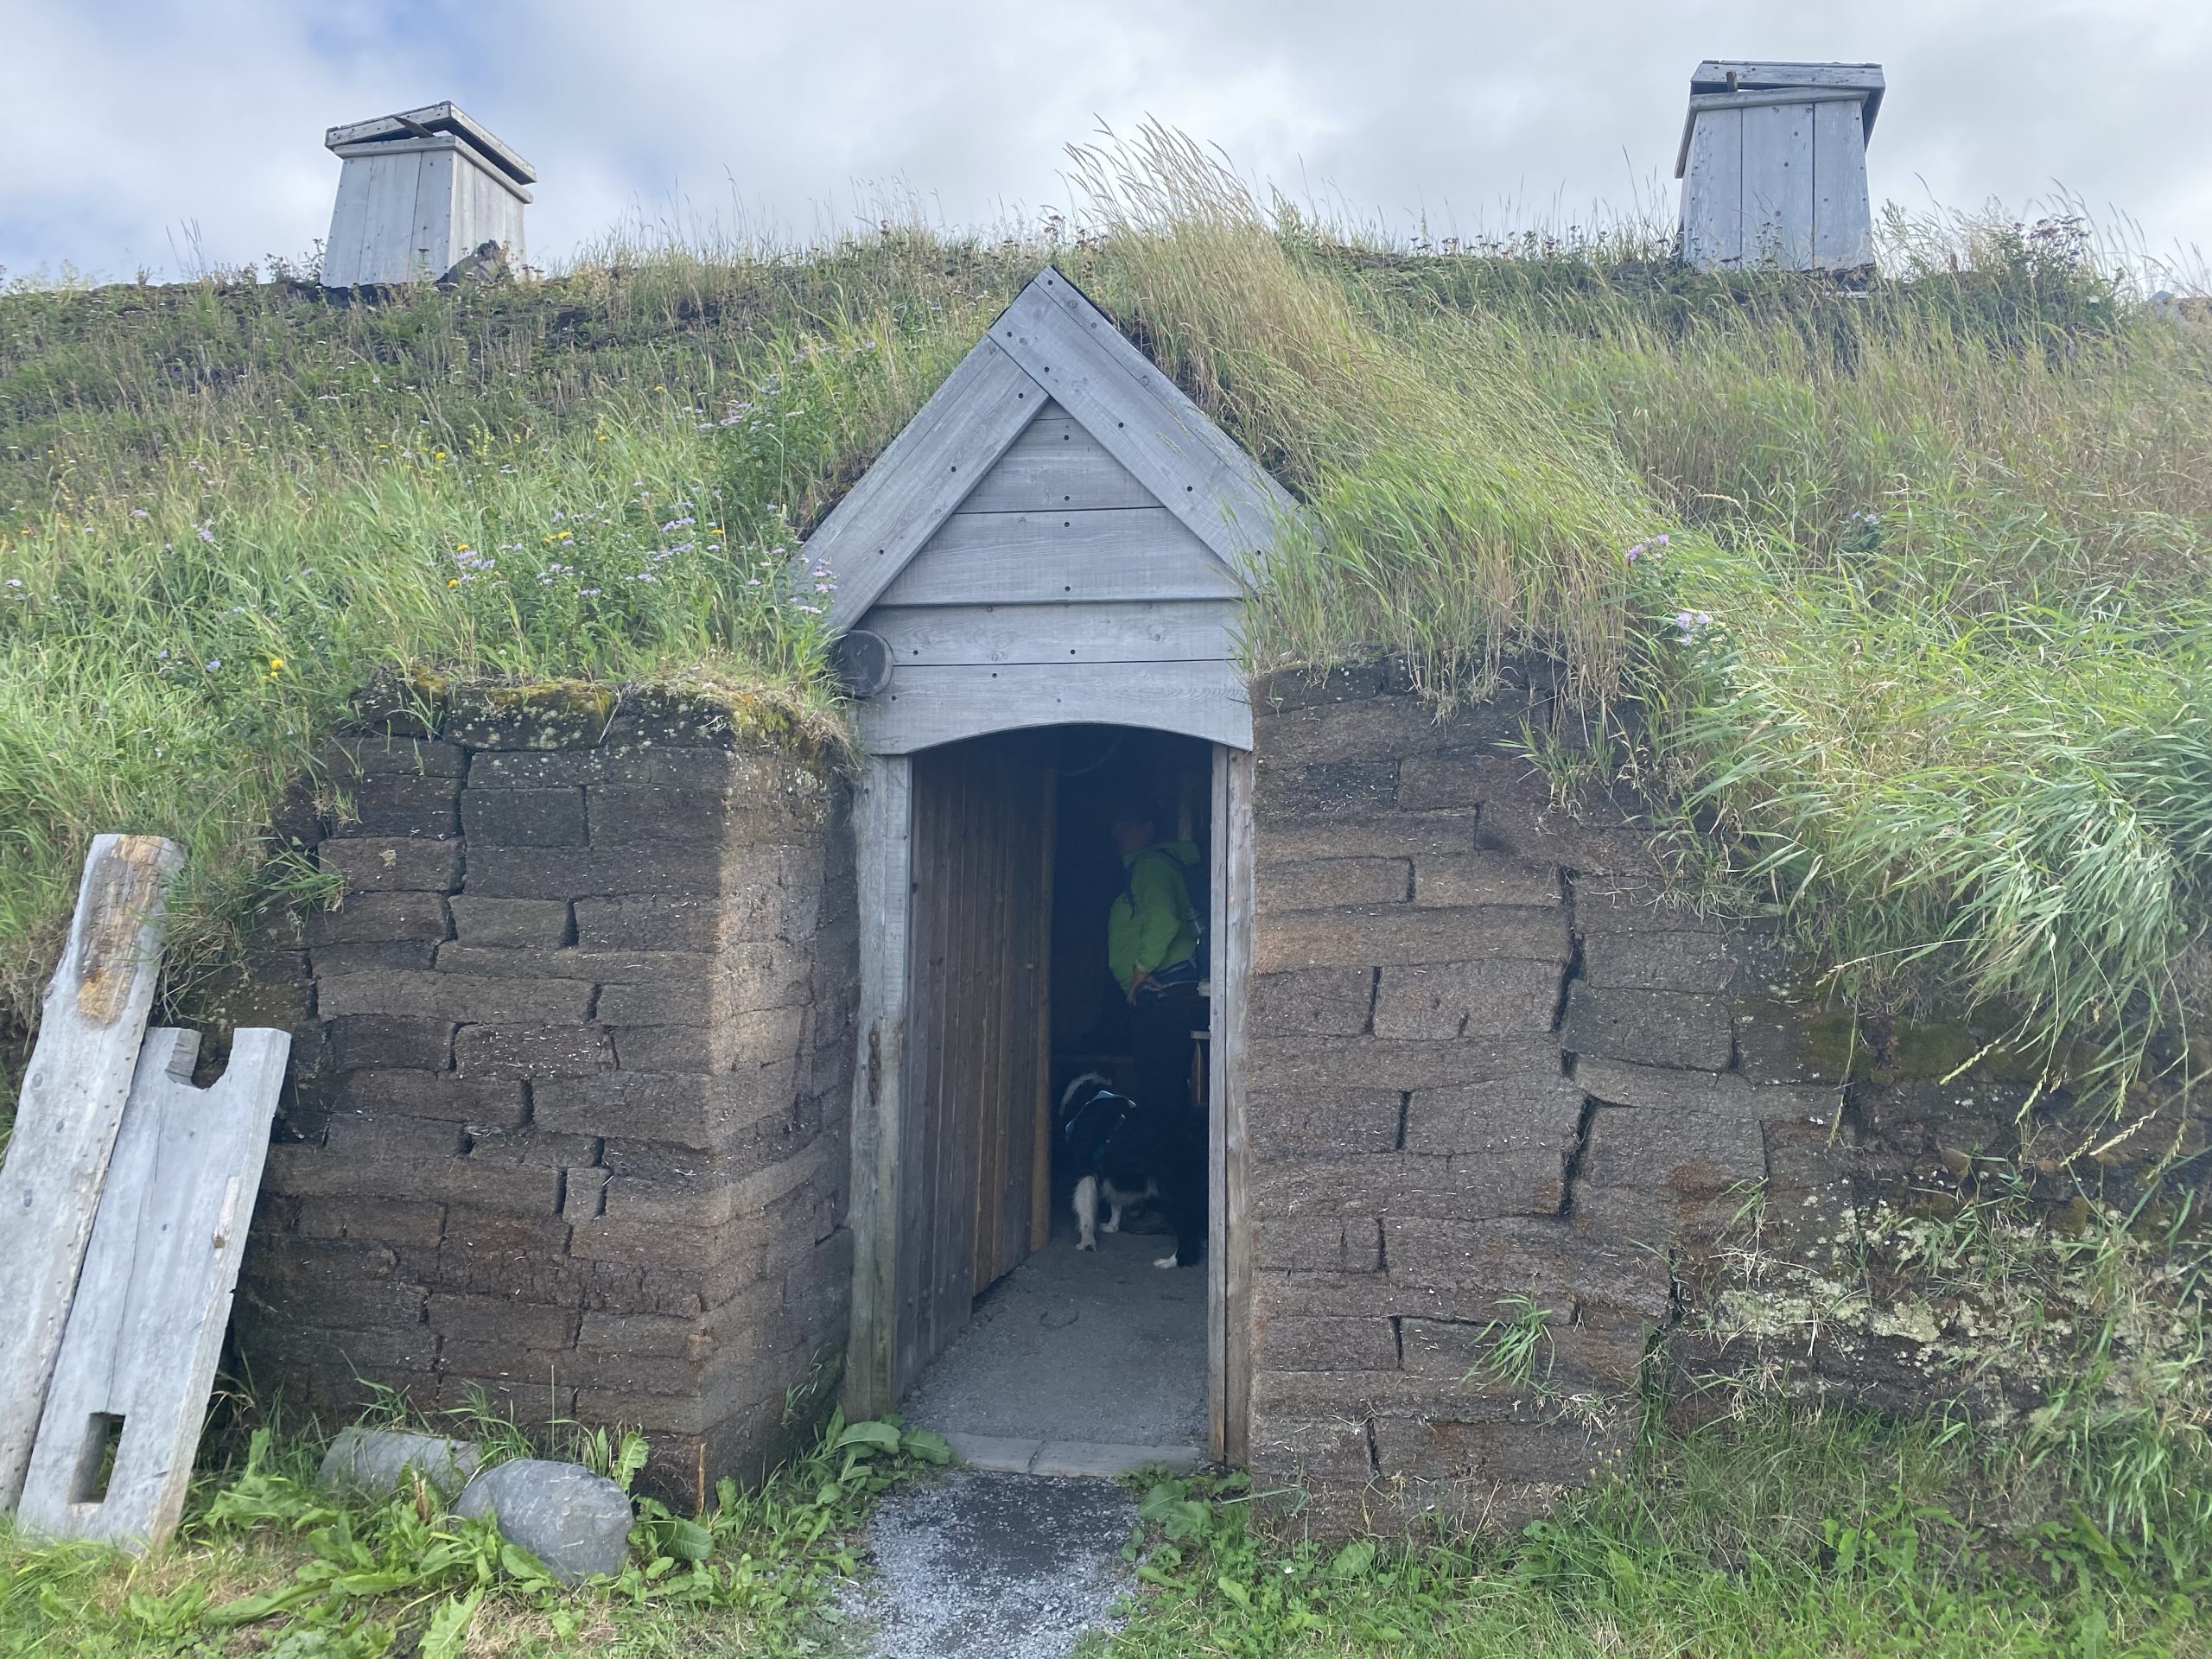 An entry door into a re-creation of a 1,000 year old Norse sod house.